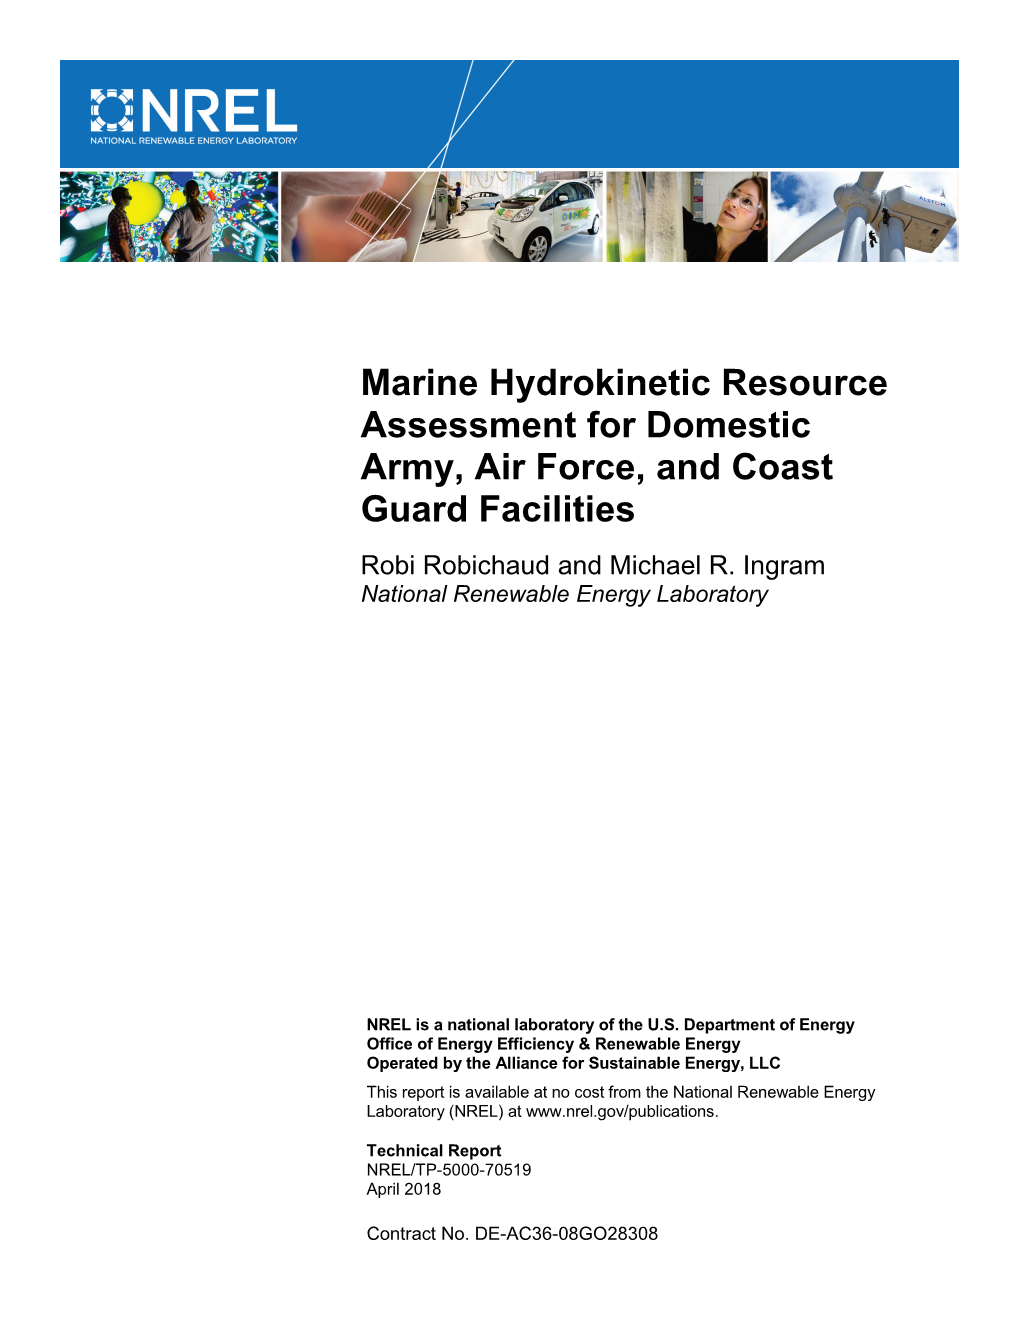 Marine Hydrokinetic Resource Assessment for Domestic Army, Air Force, and Coast Guard Facilities Robi Robichaud and Michael R